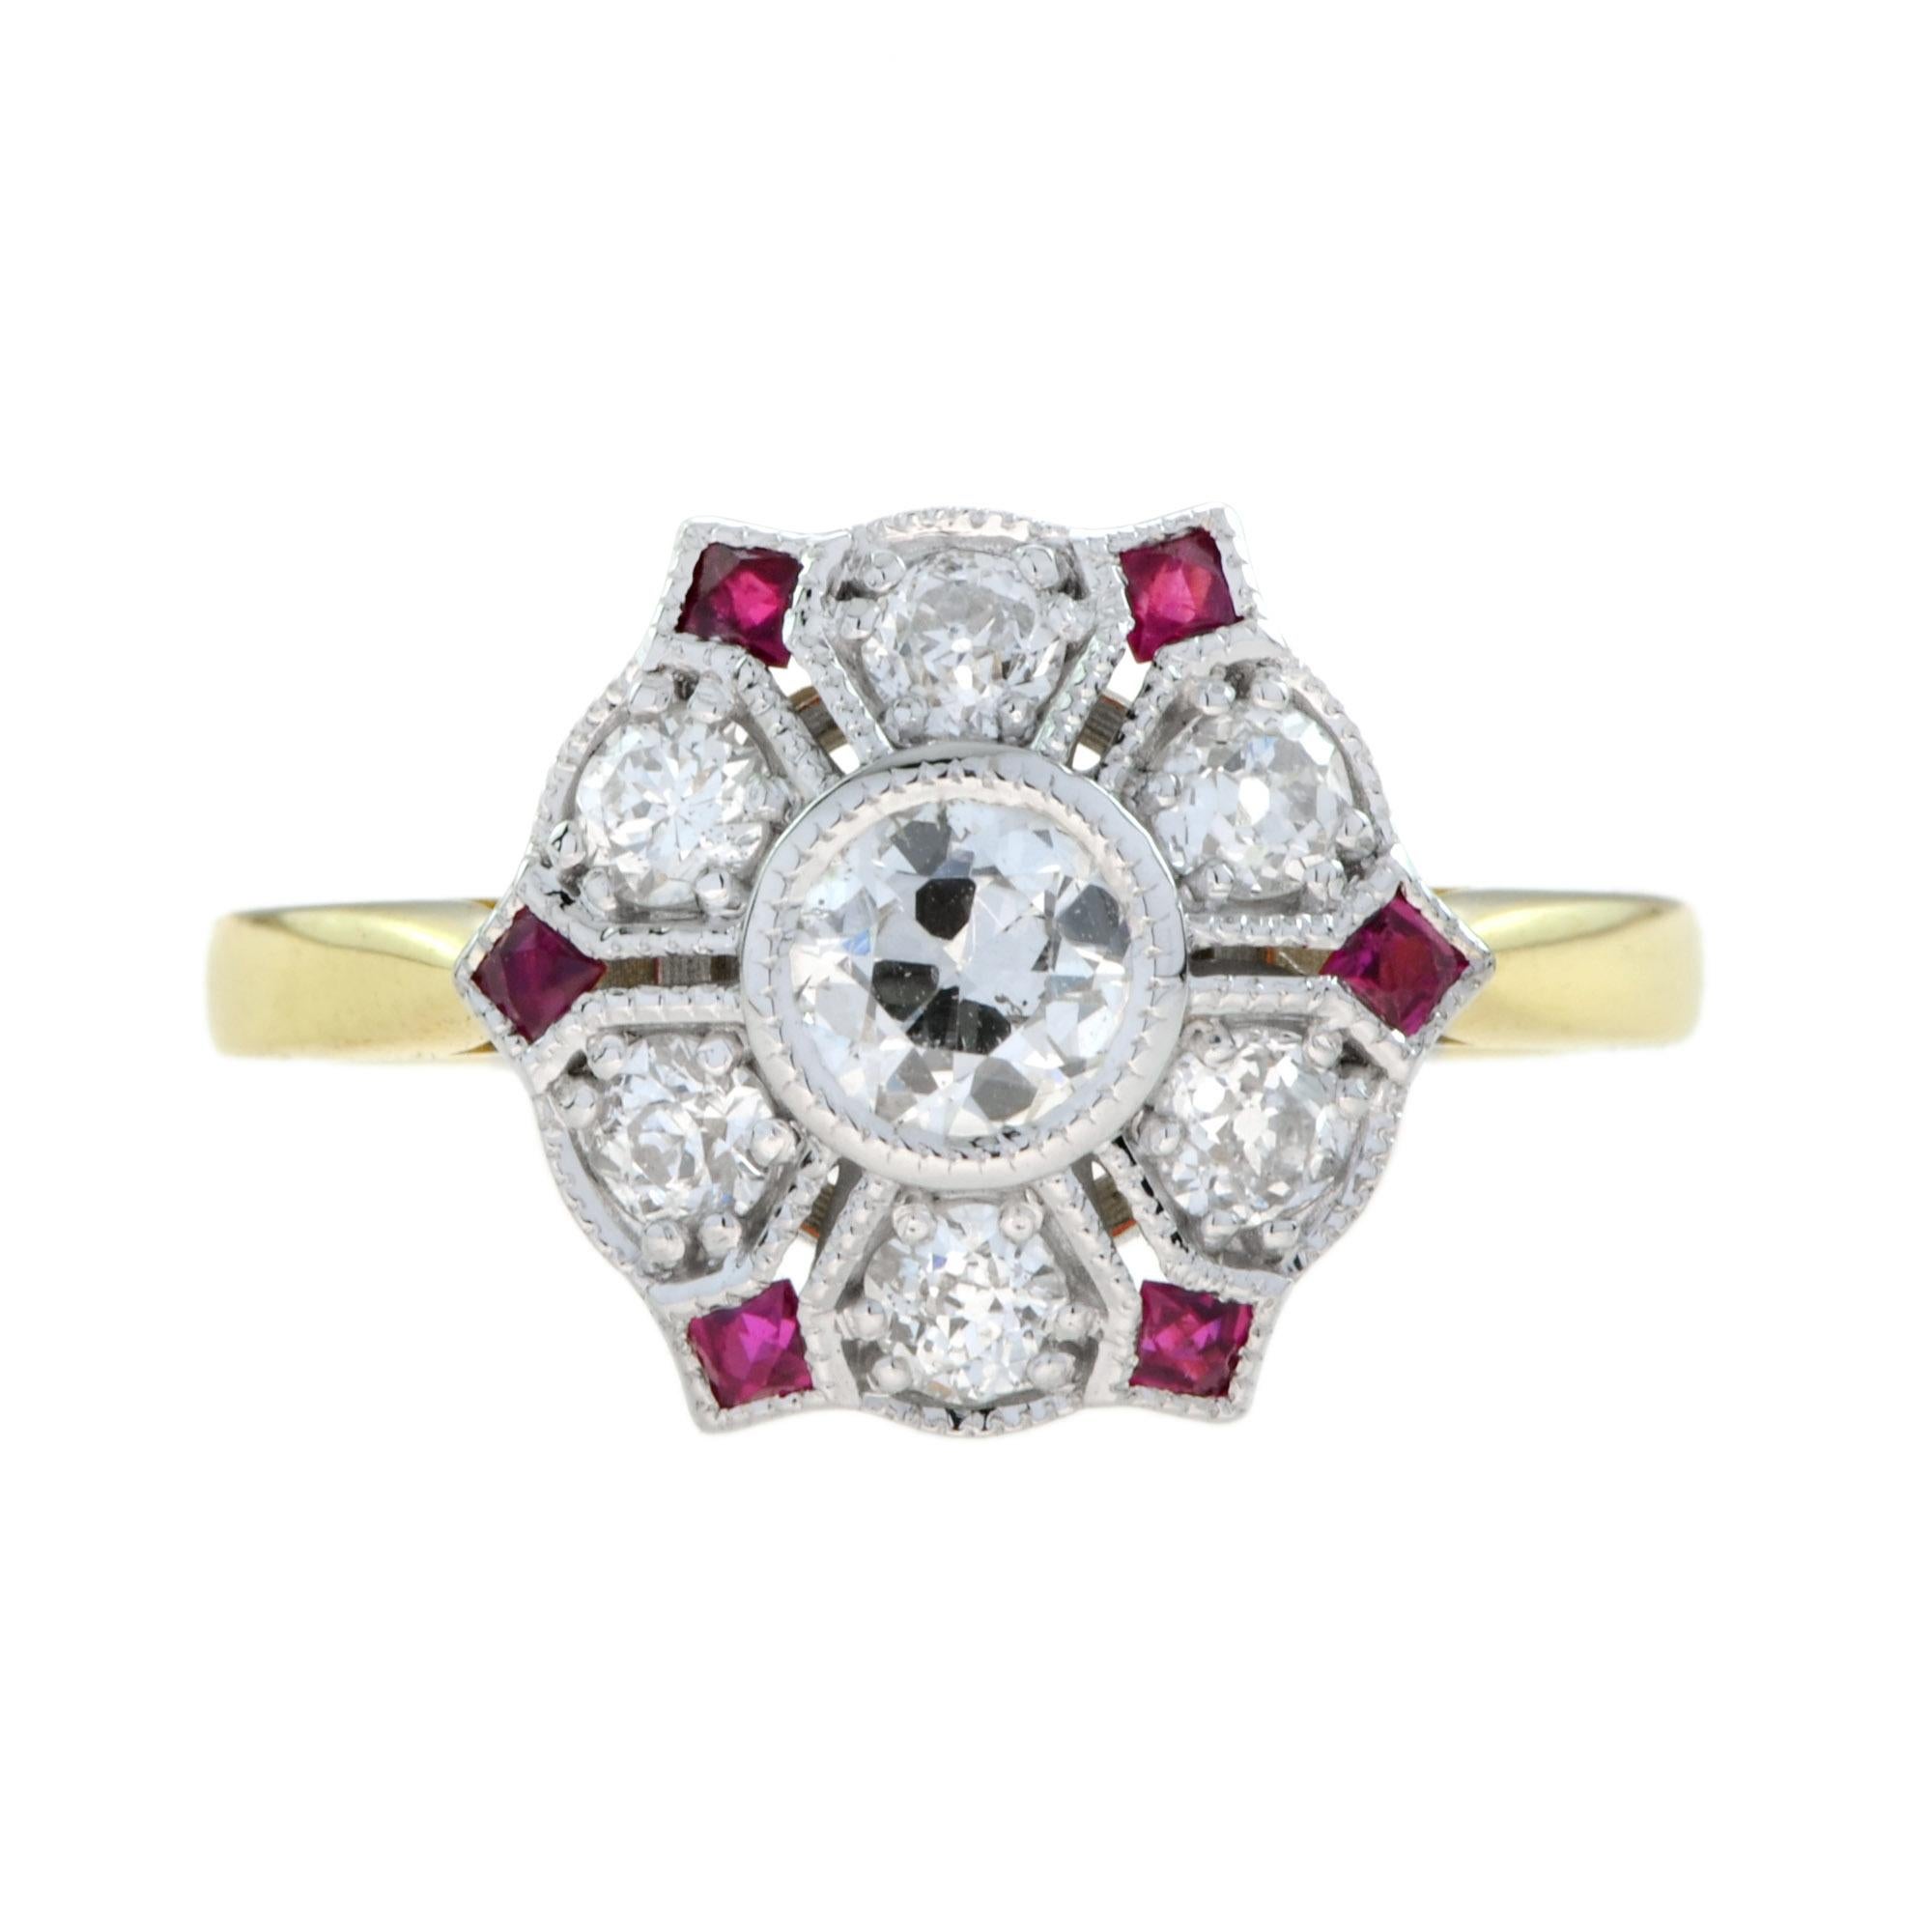 Diamond and Ruby Antique Style Floral Ring in 18k White Top Yellow Gold